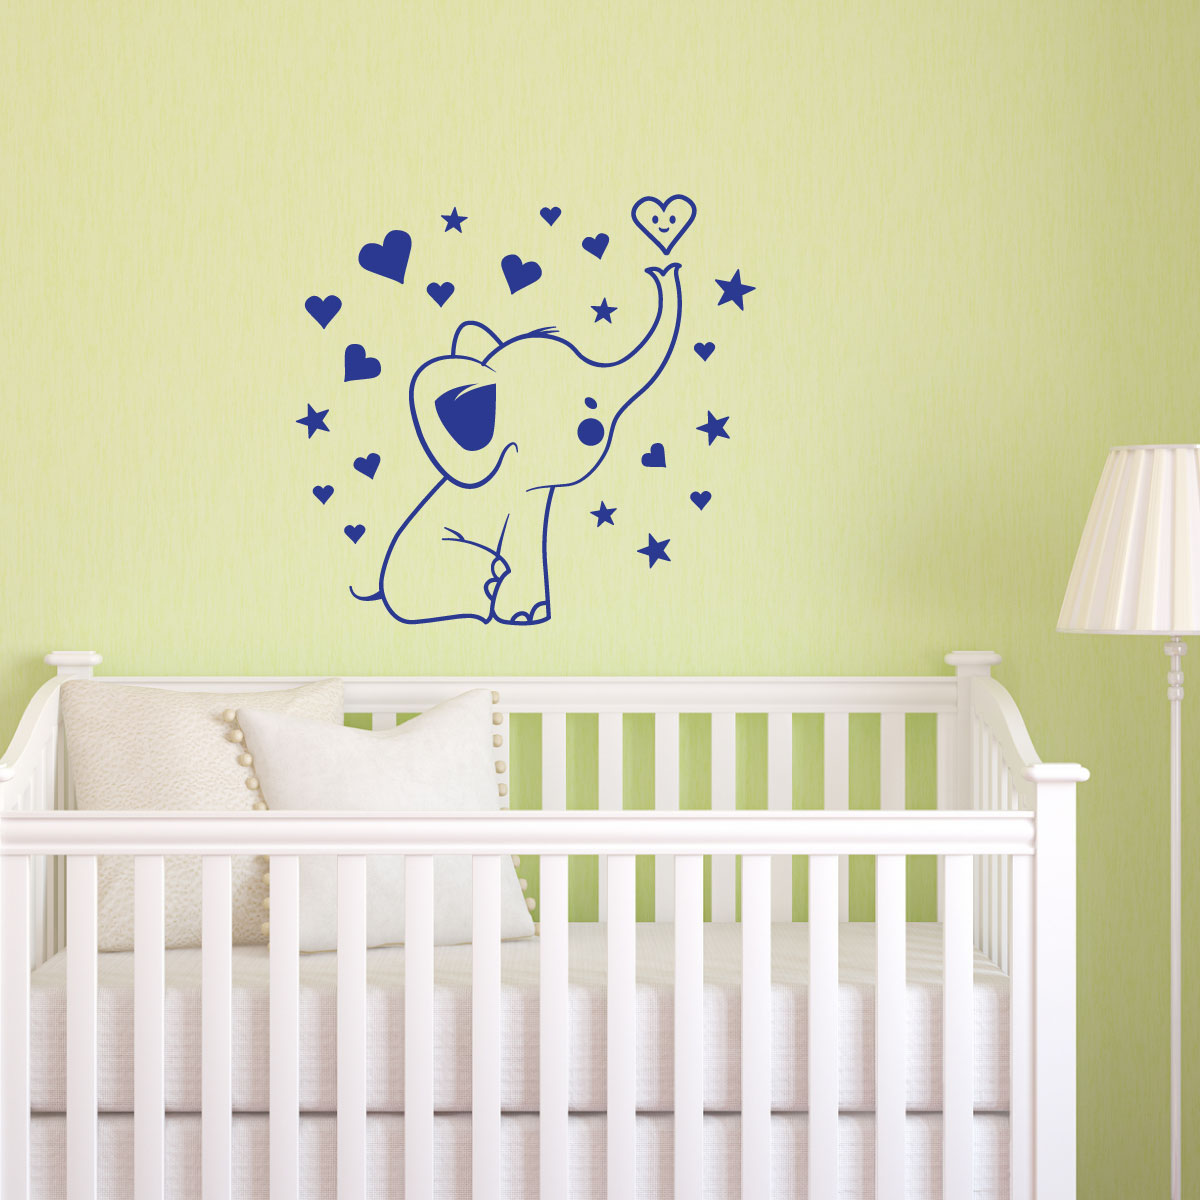 Wall decal Small elephant with stars, hearts